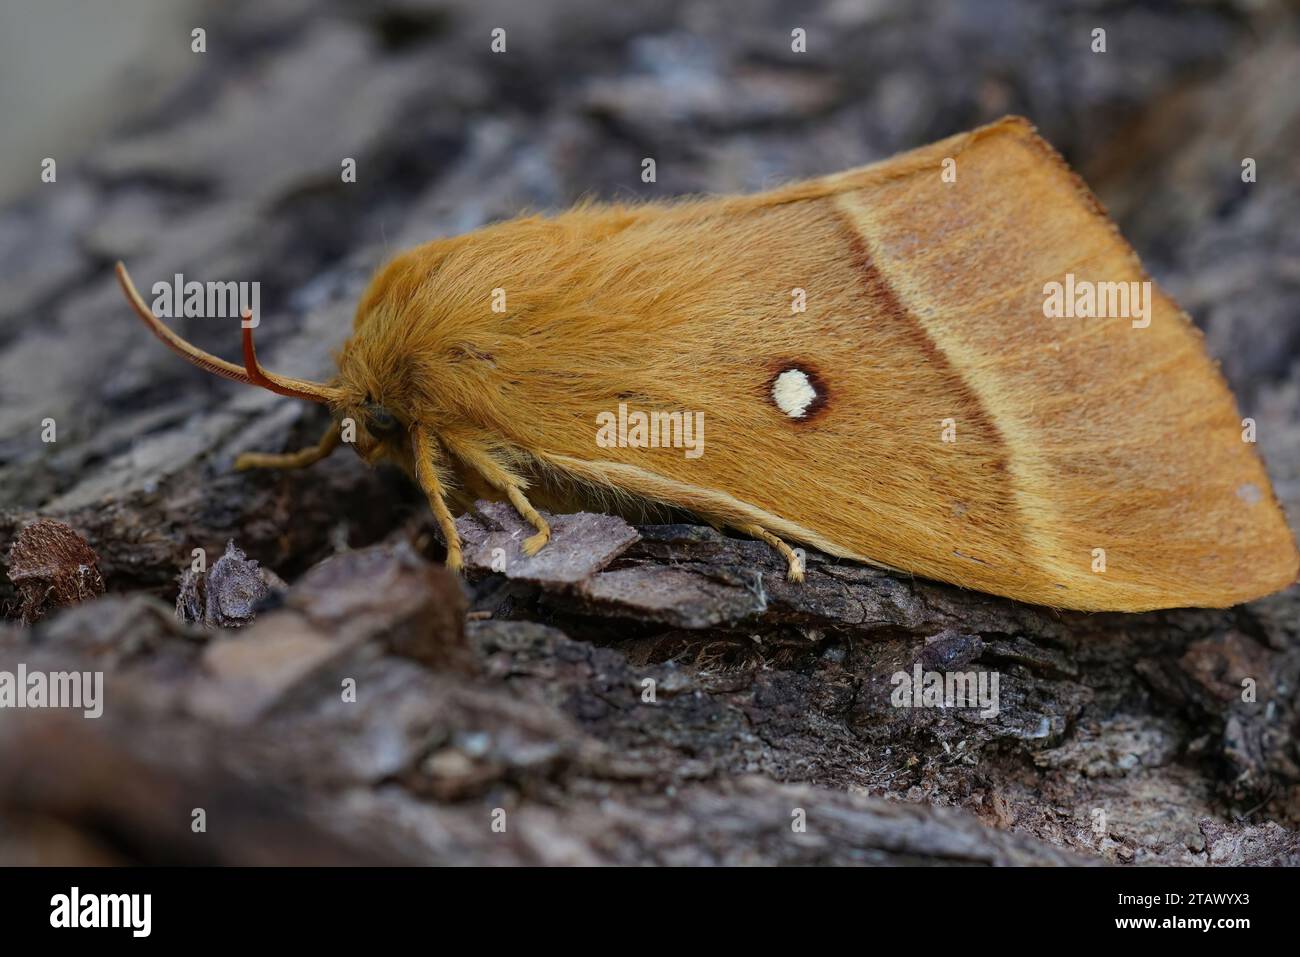 Detailed closeup on the large , brown, Oak Eggar moth, Lasiocampa quercus sitting on a piece of wood Stock Photo